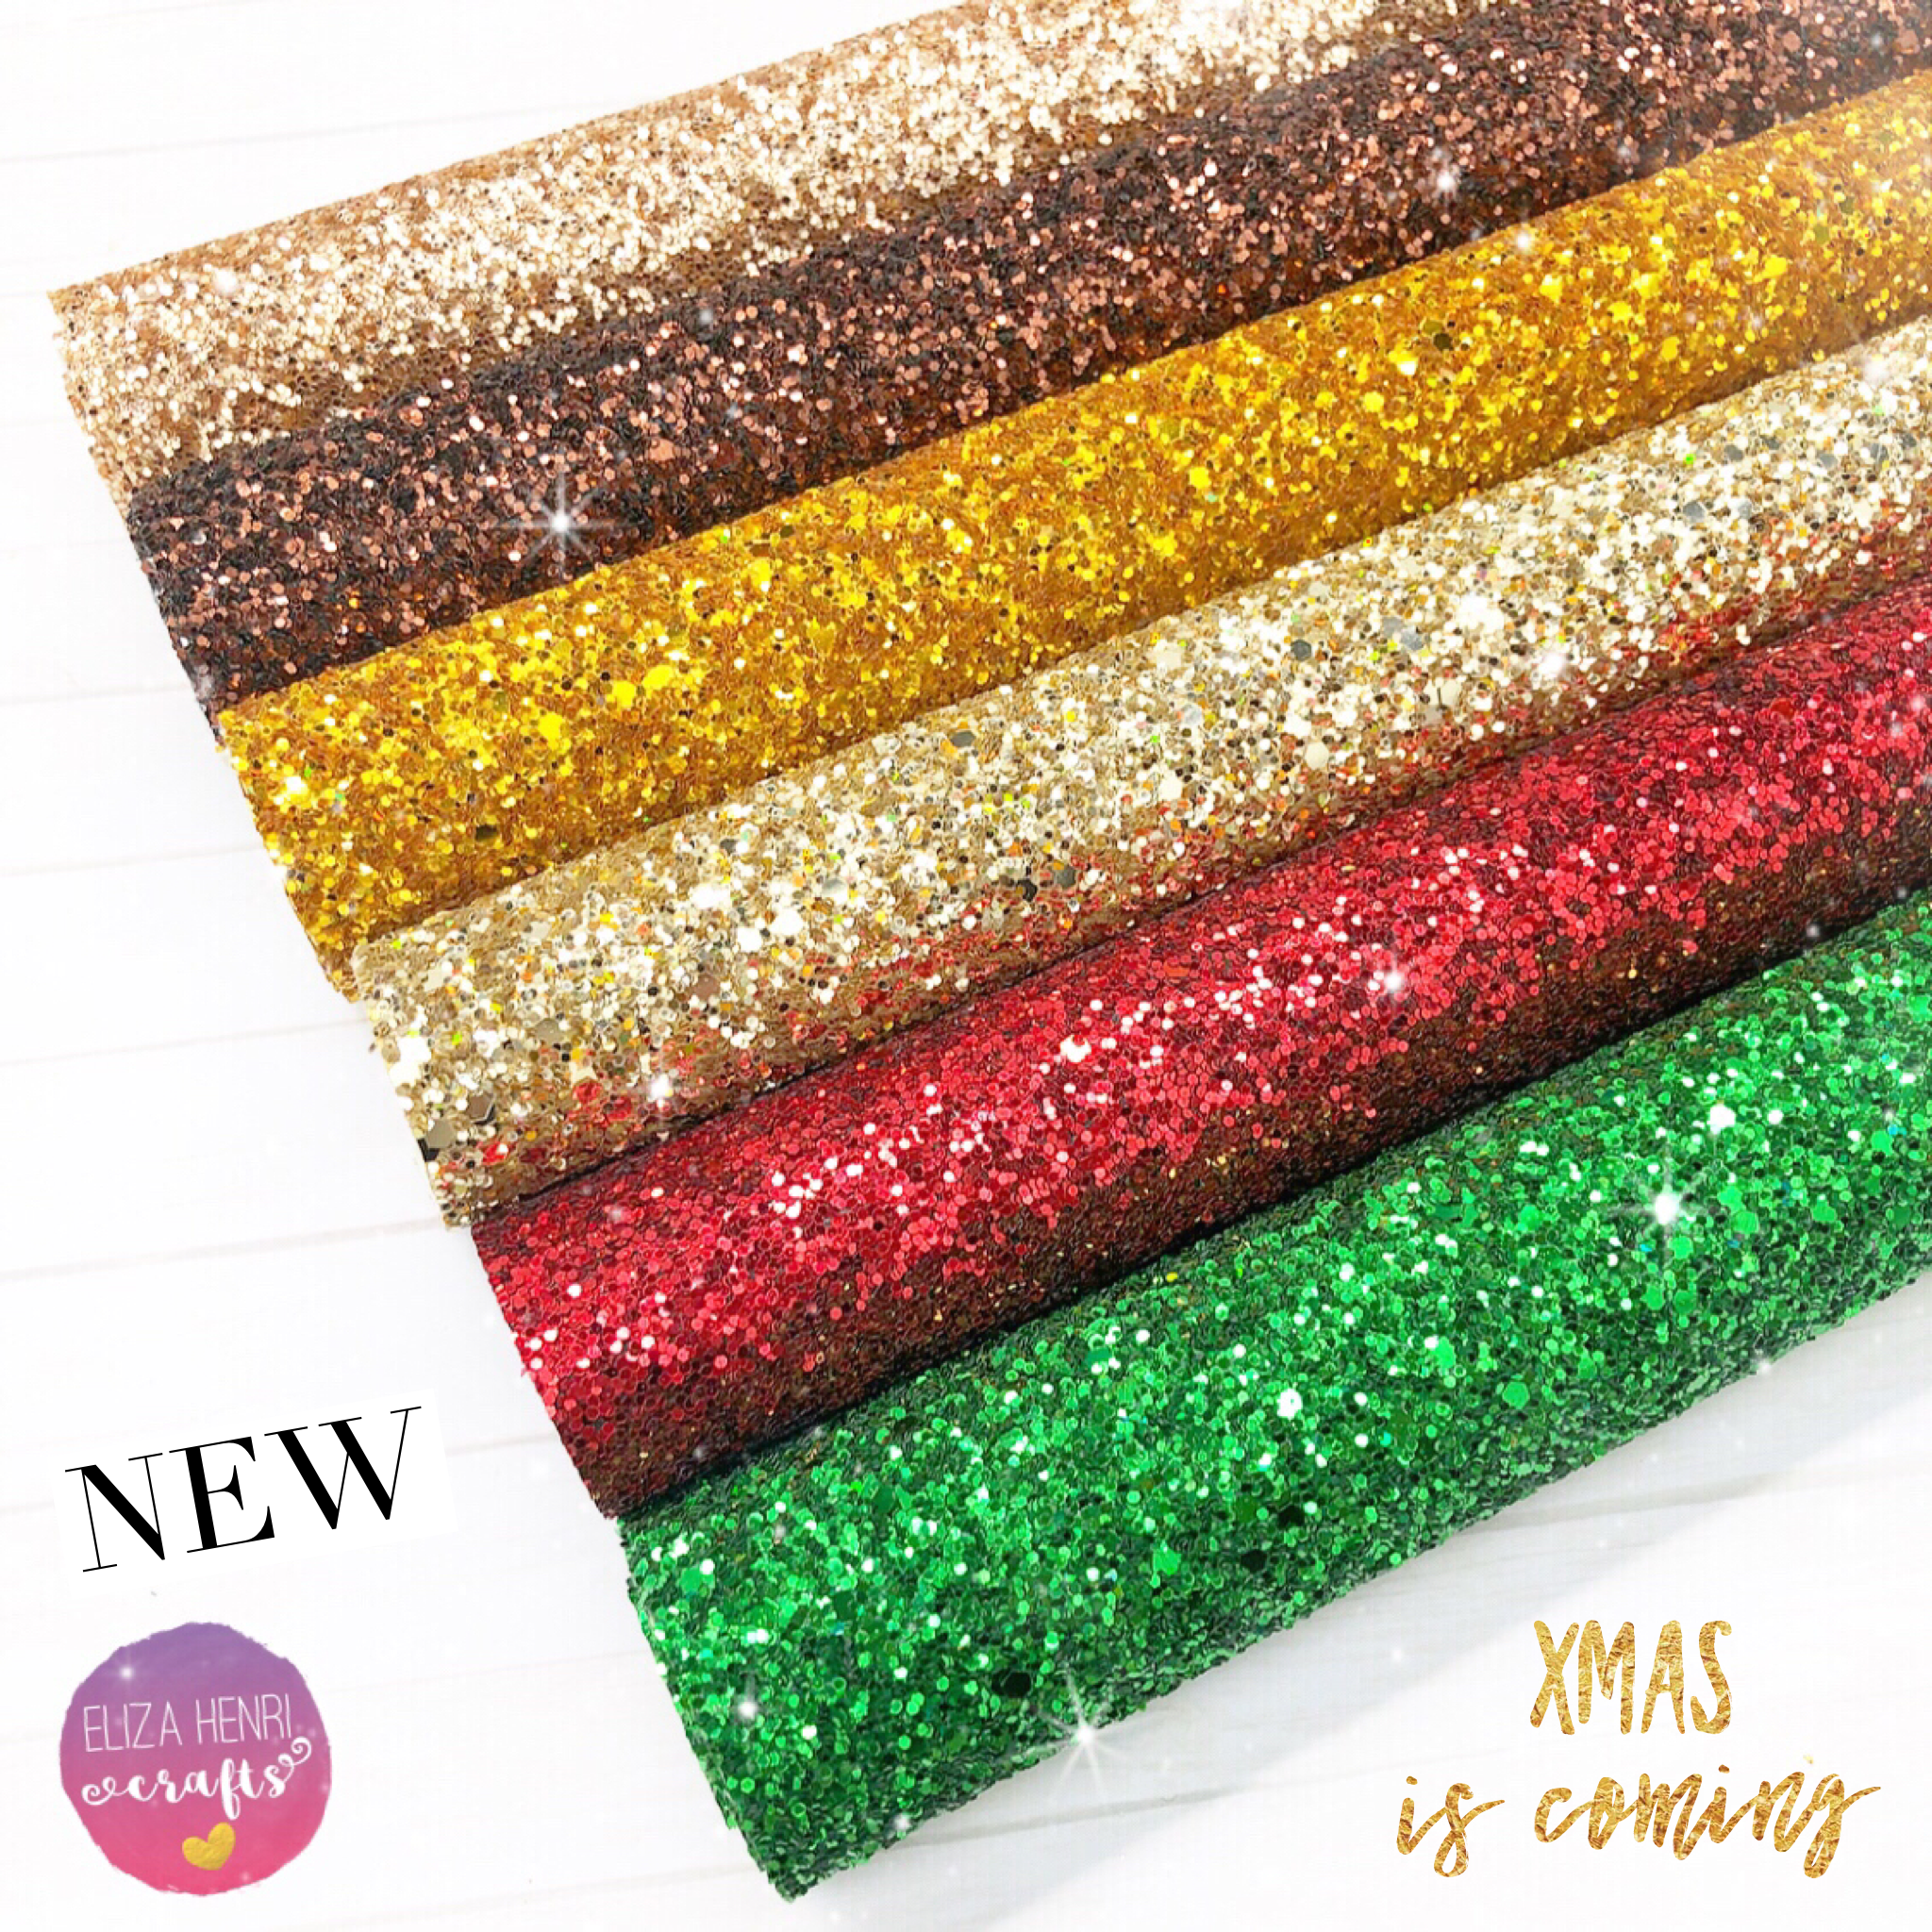 The Classic Chunky Glitter Fabric collections